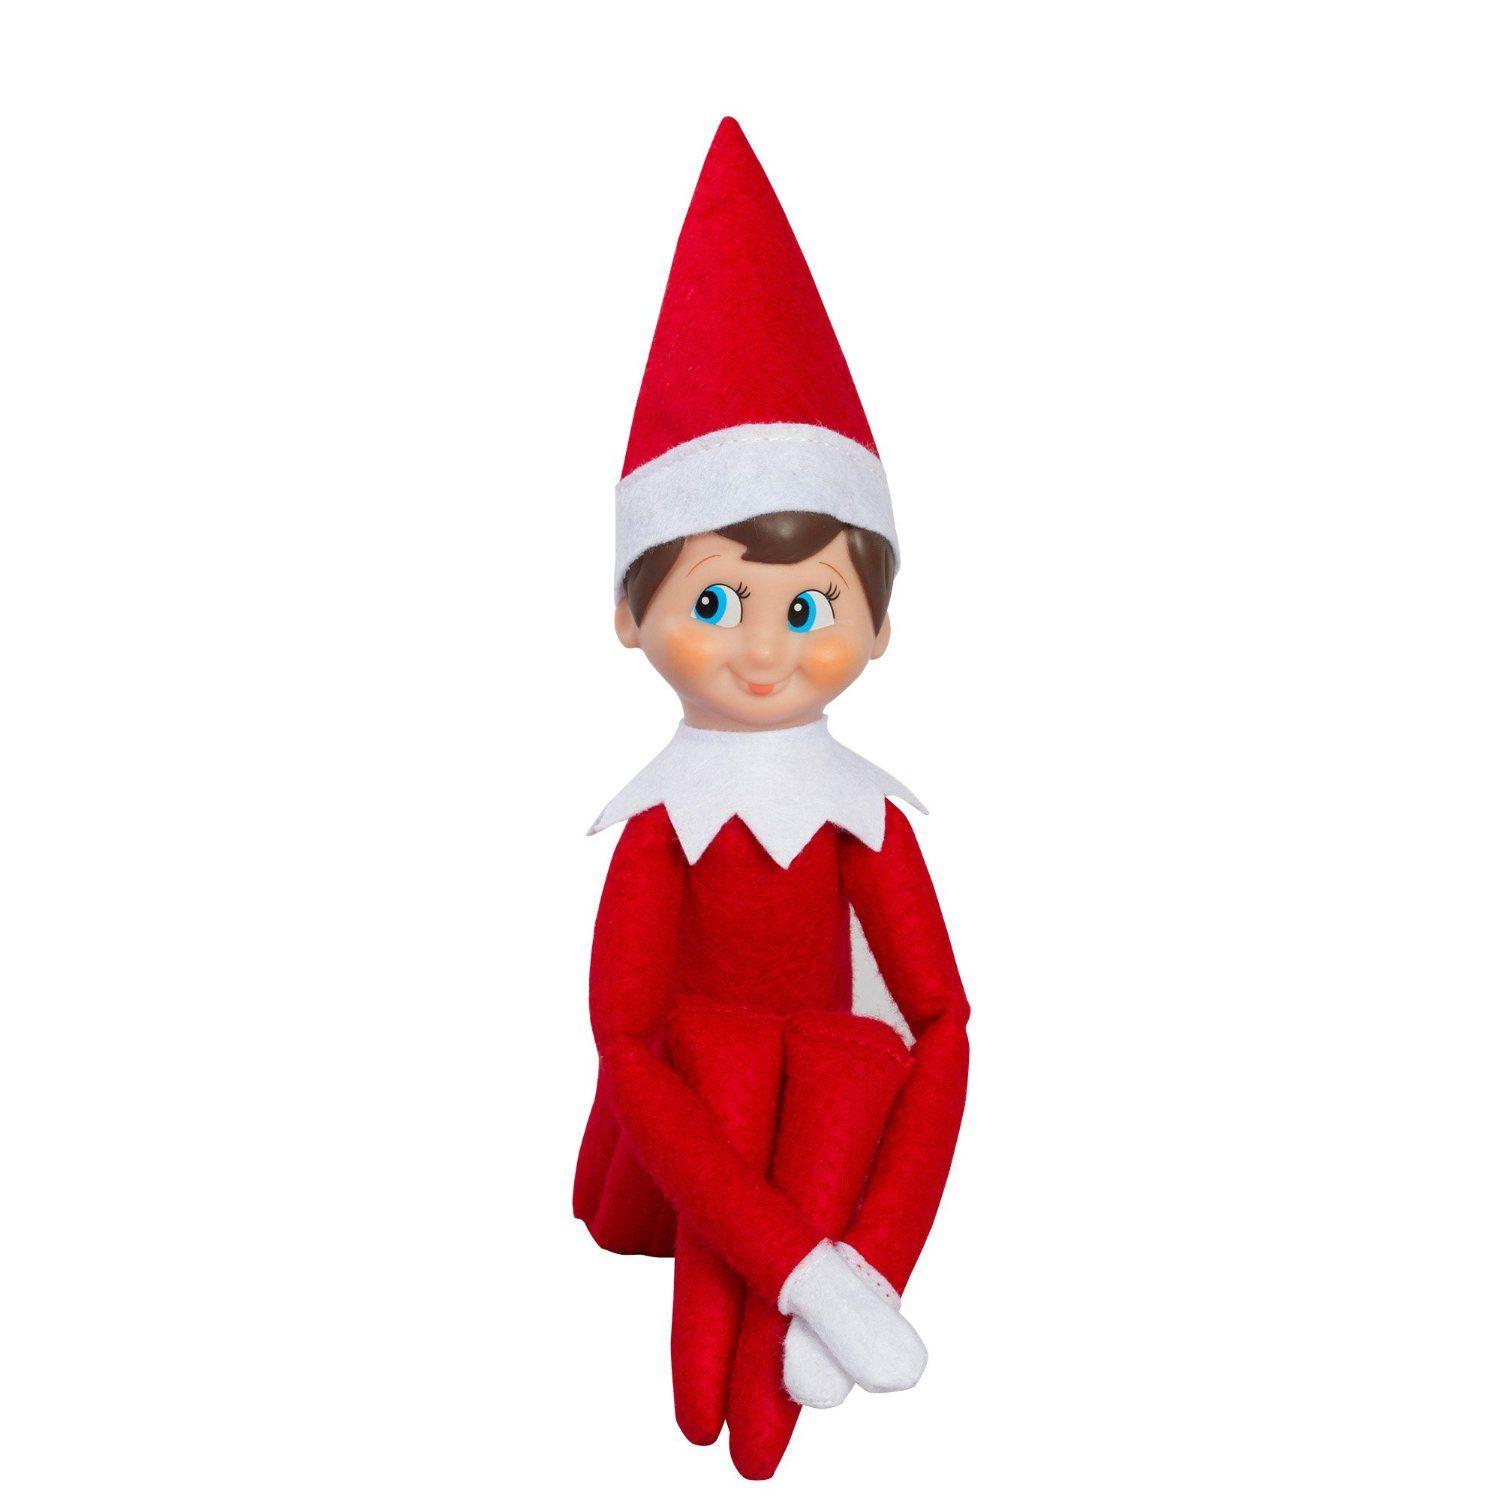 Details more than 63 elf on the shelf wallpaper best - in.cdgdbentre